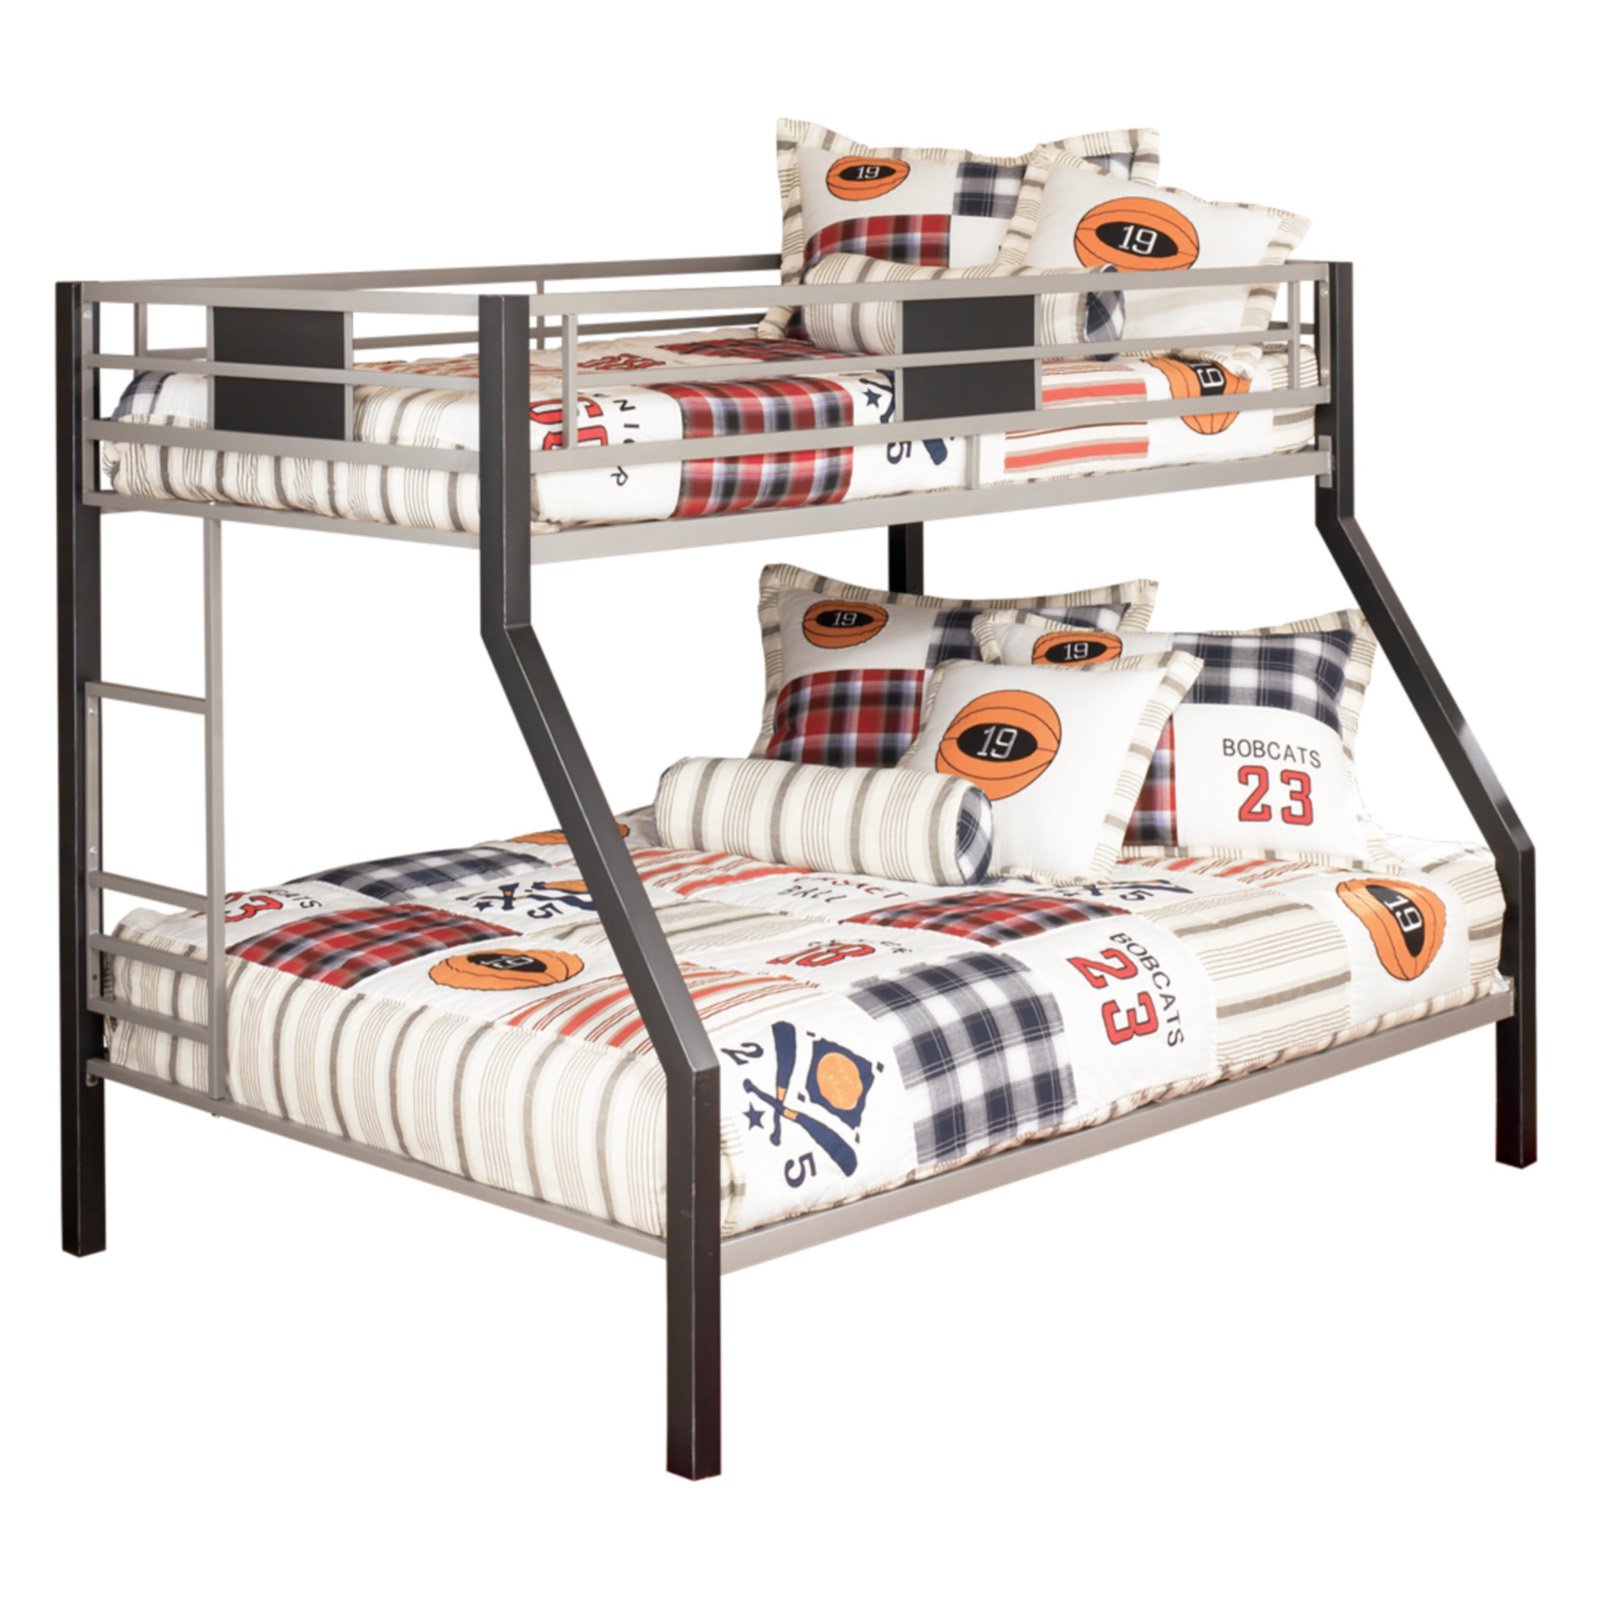 Ashley Furniture Dinsmore Metal Twin over Full Bunk Bed in Black and Gray - image 1 of 2